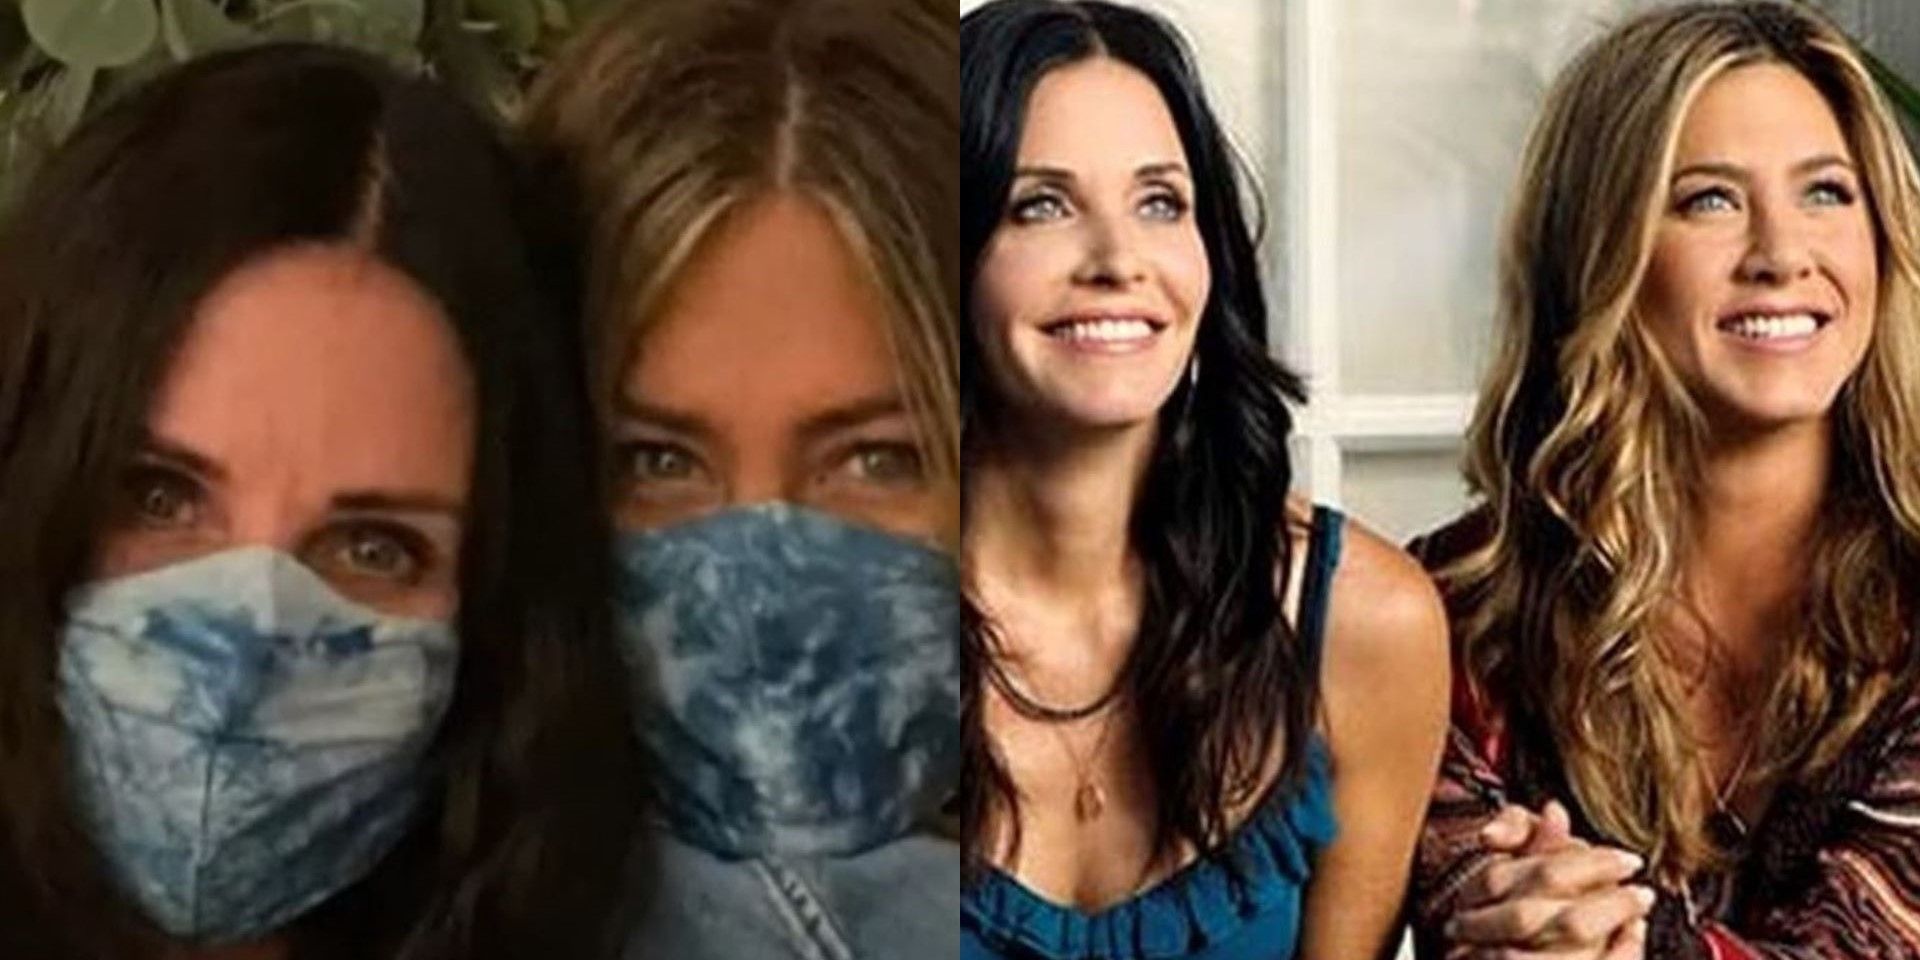 A selfie of Jennifer Aniston and Courteney Cox wearing masks together side by side with a promo shot of the two sitting together on Cougar Town